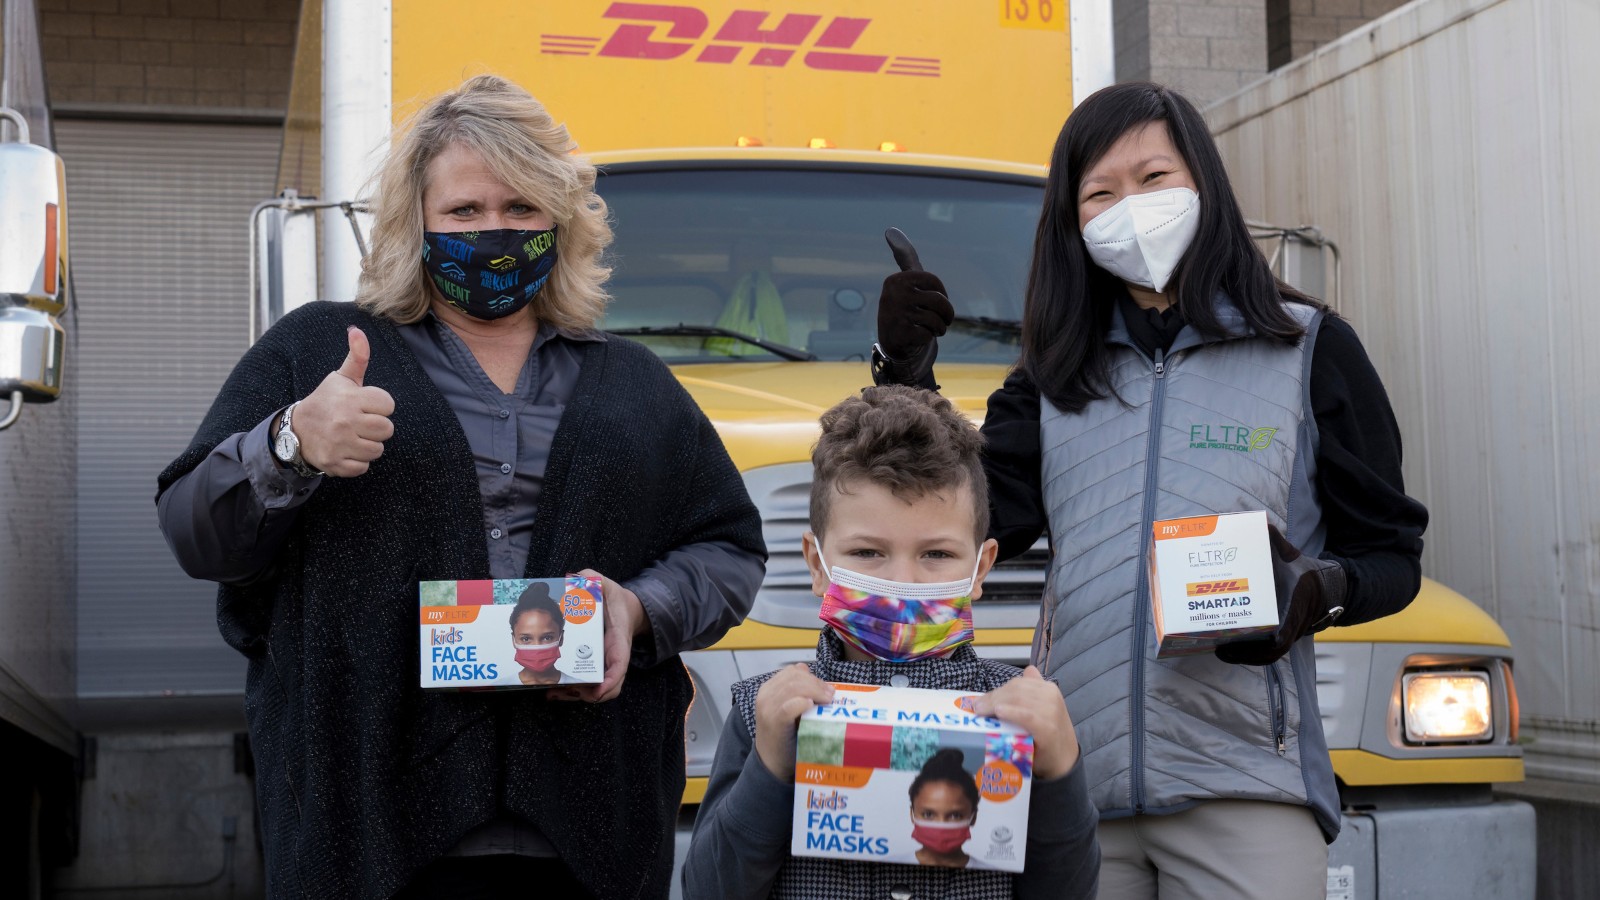 Mayor Dana Ralph of Kent, Washington, left, and SmartAID volunteer Trang Le handing the first box of donated masks to a local boy, kicking off the Millions of Masks for Children initiative. Photo by Paul Christian Gordon/SmartAID